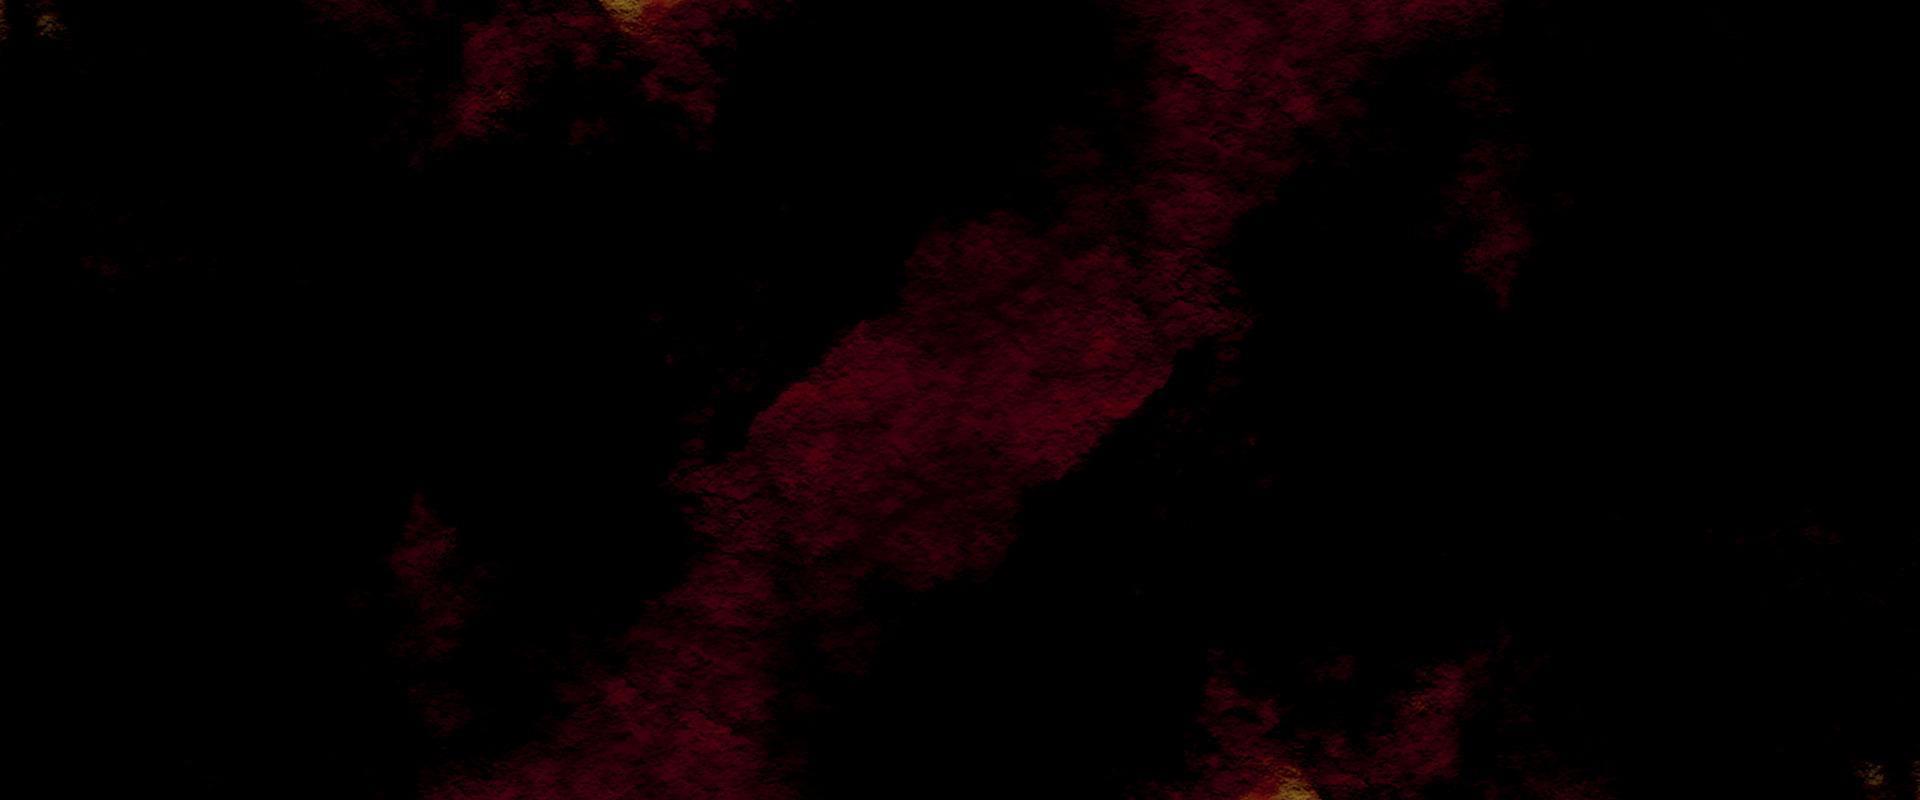 Burning coals and crack surface. Black and red rock stone background. Dark  red horror scary background. Old wall texture cement black red background.  Red grunge textured stone wall background. 26967457 Vector Art